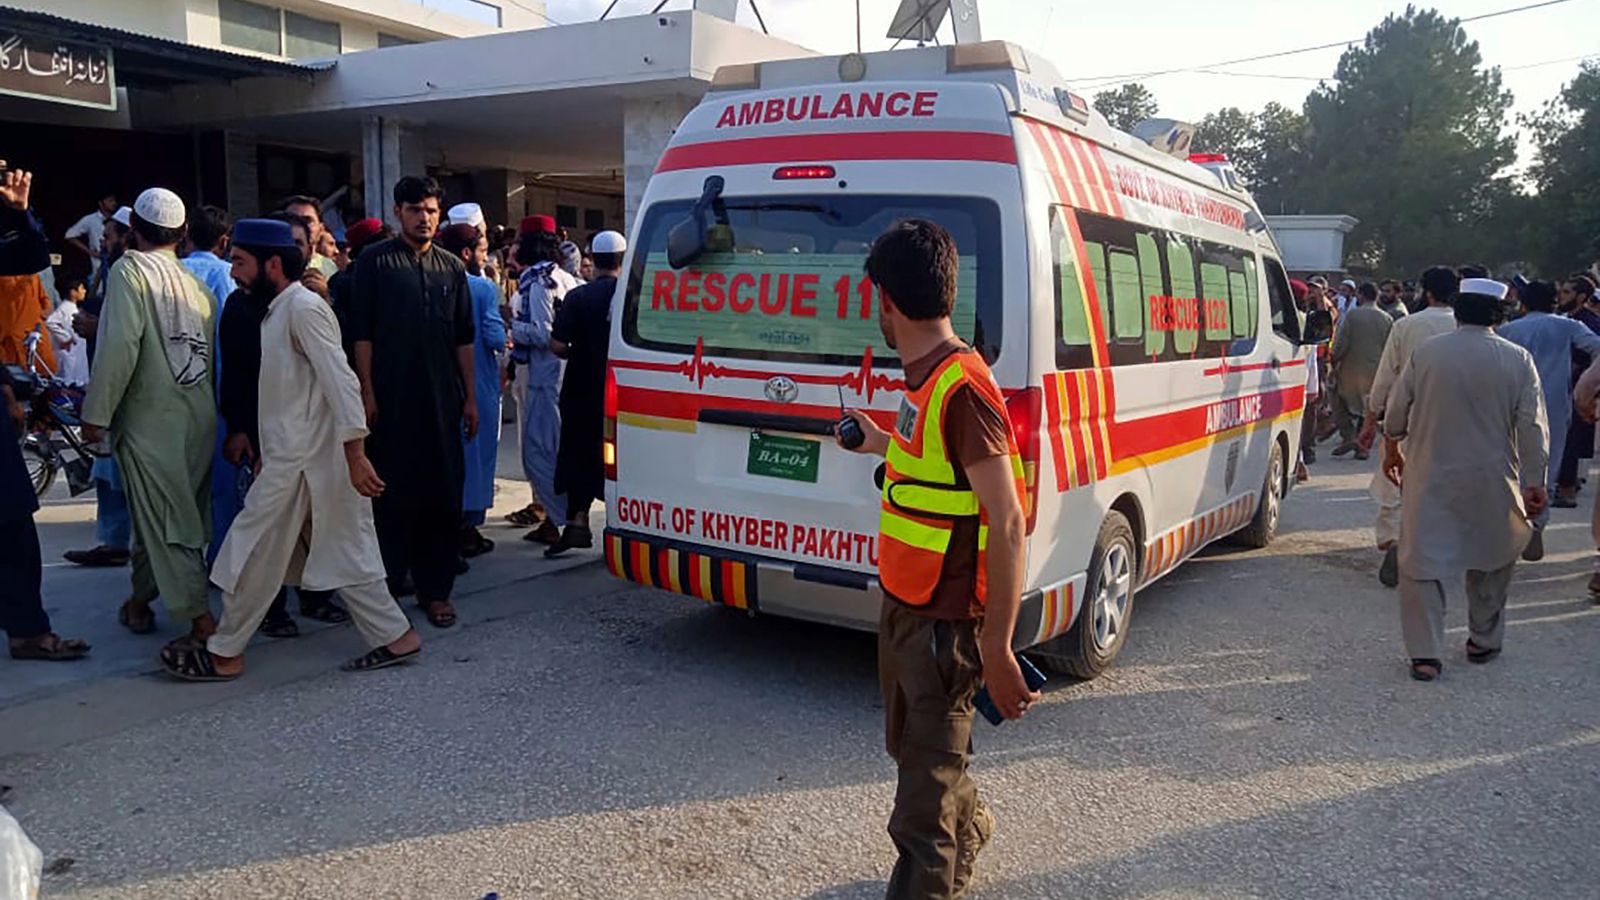 Pakistan explosion: At least 40 dead in blast at political rally in northwest province